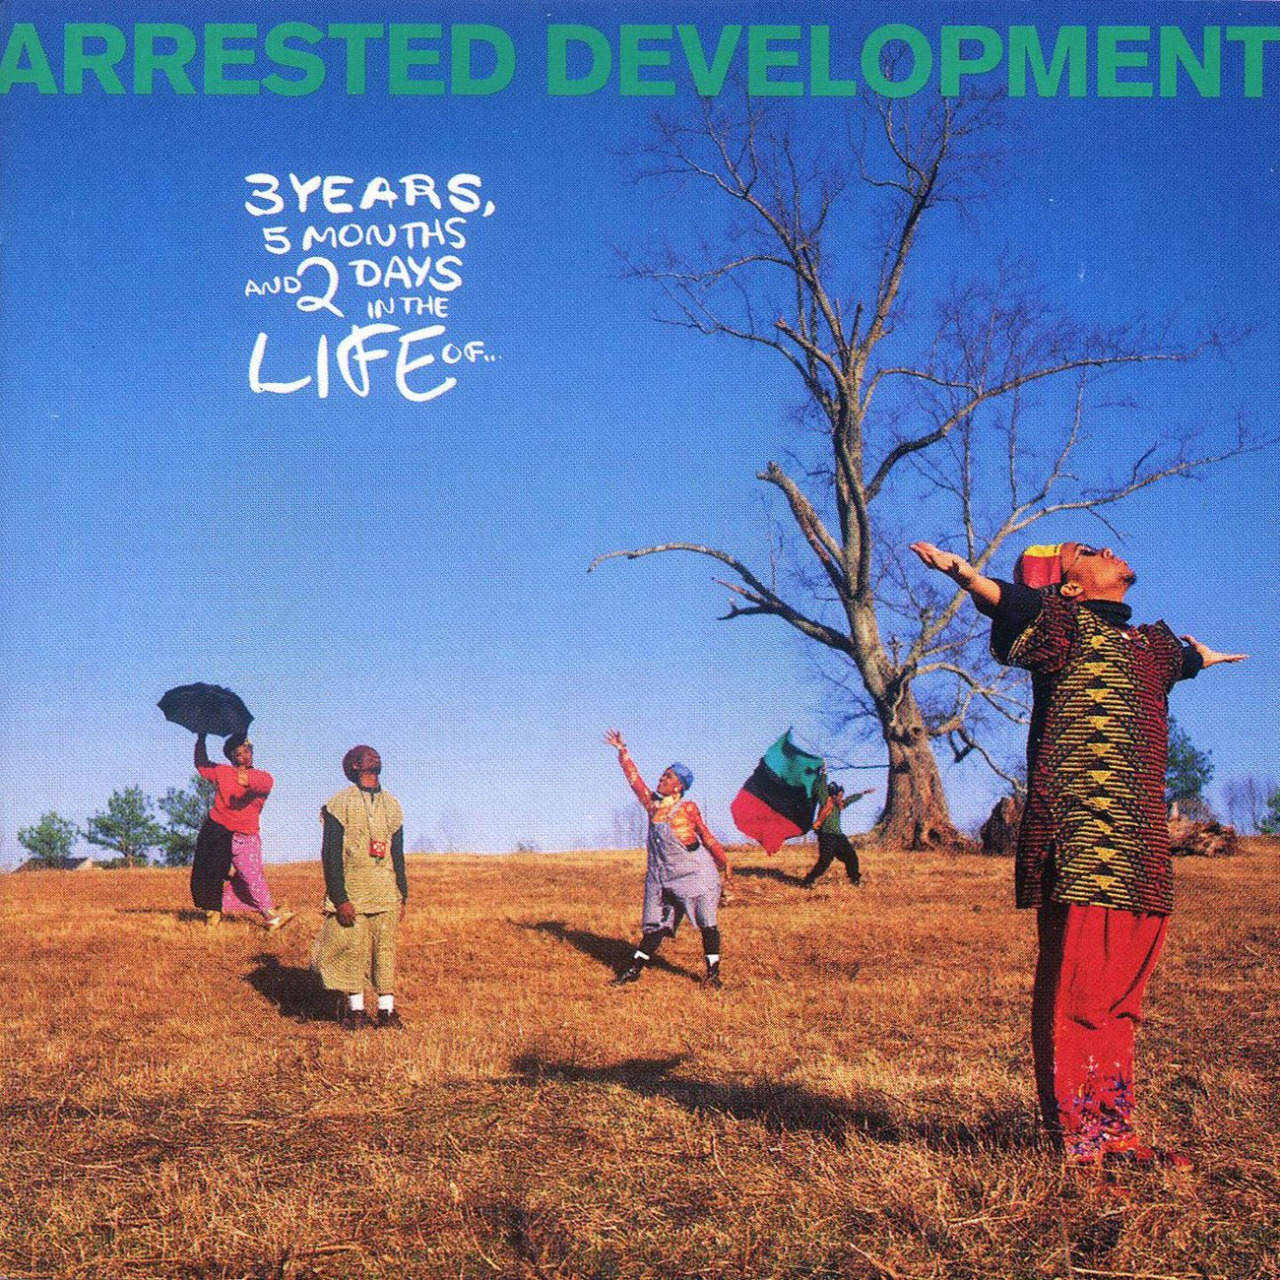 Today in Hip Hop History: Arrested Development Dropped Their Debut Album ‘3 Years, 5 Months and 2 Days in the Life Of…’ 31 Years Ago